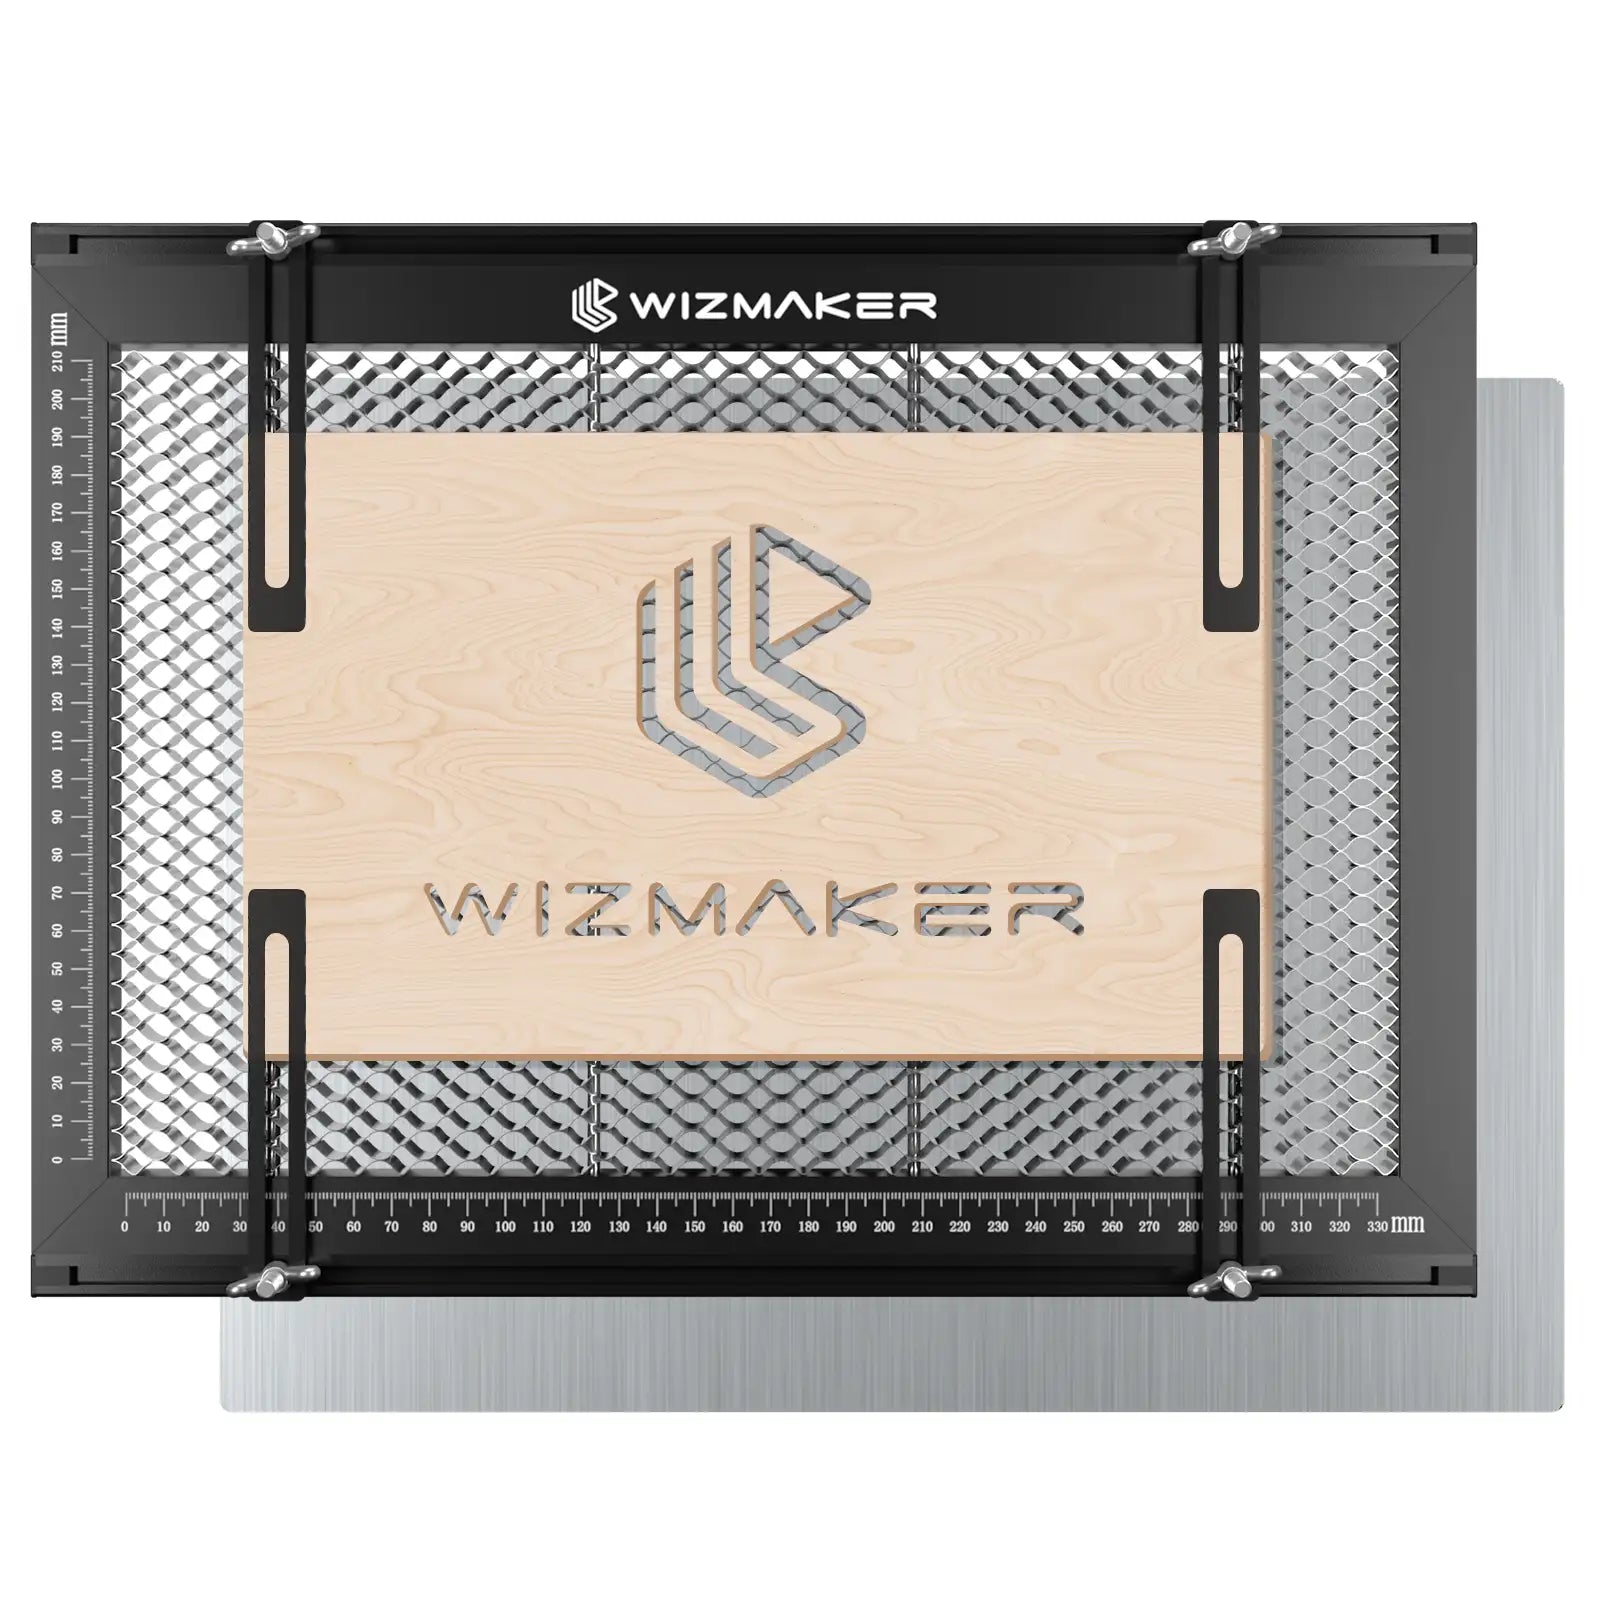 WIZMAKER Honeycomb Laser Bed, 500mmx500mm Honeycomb Working Table